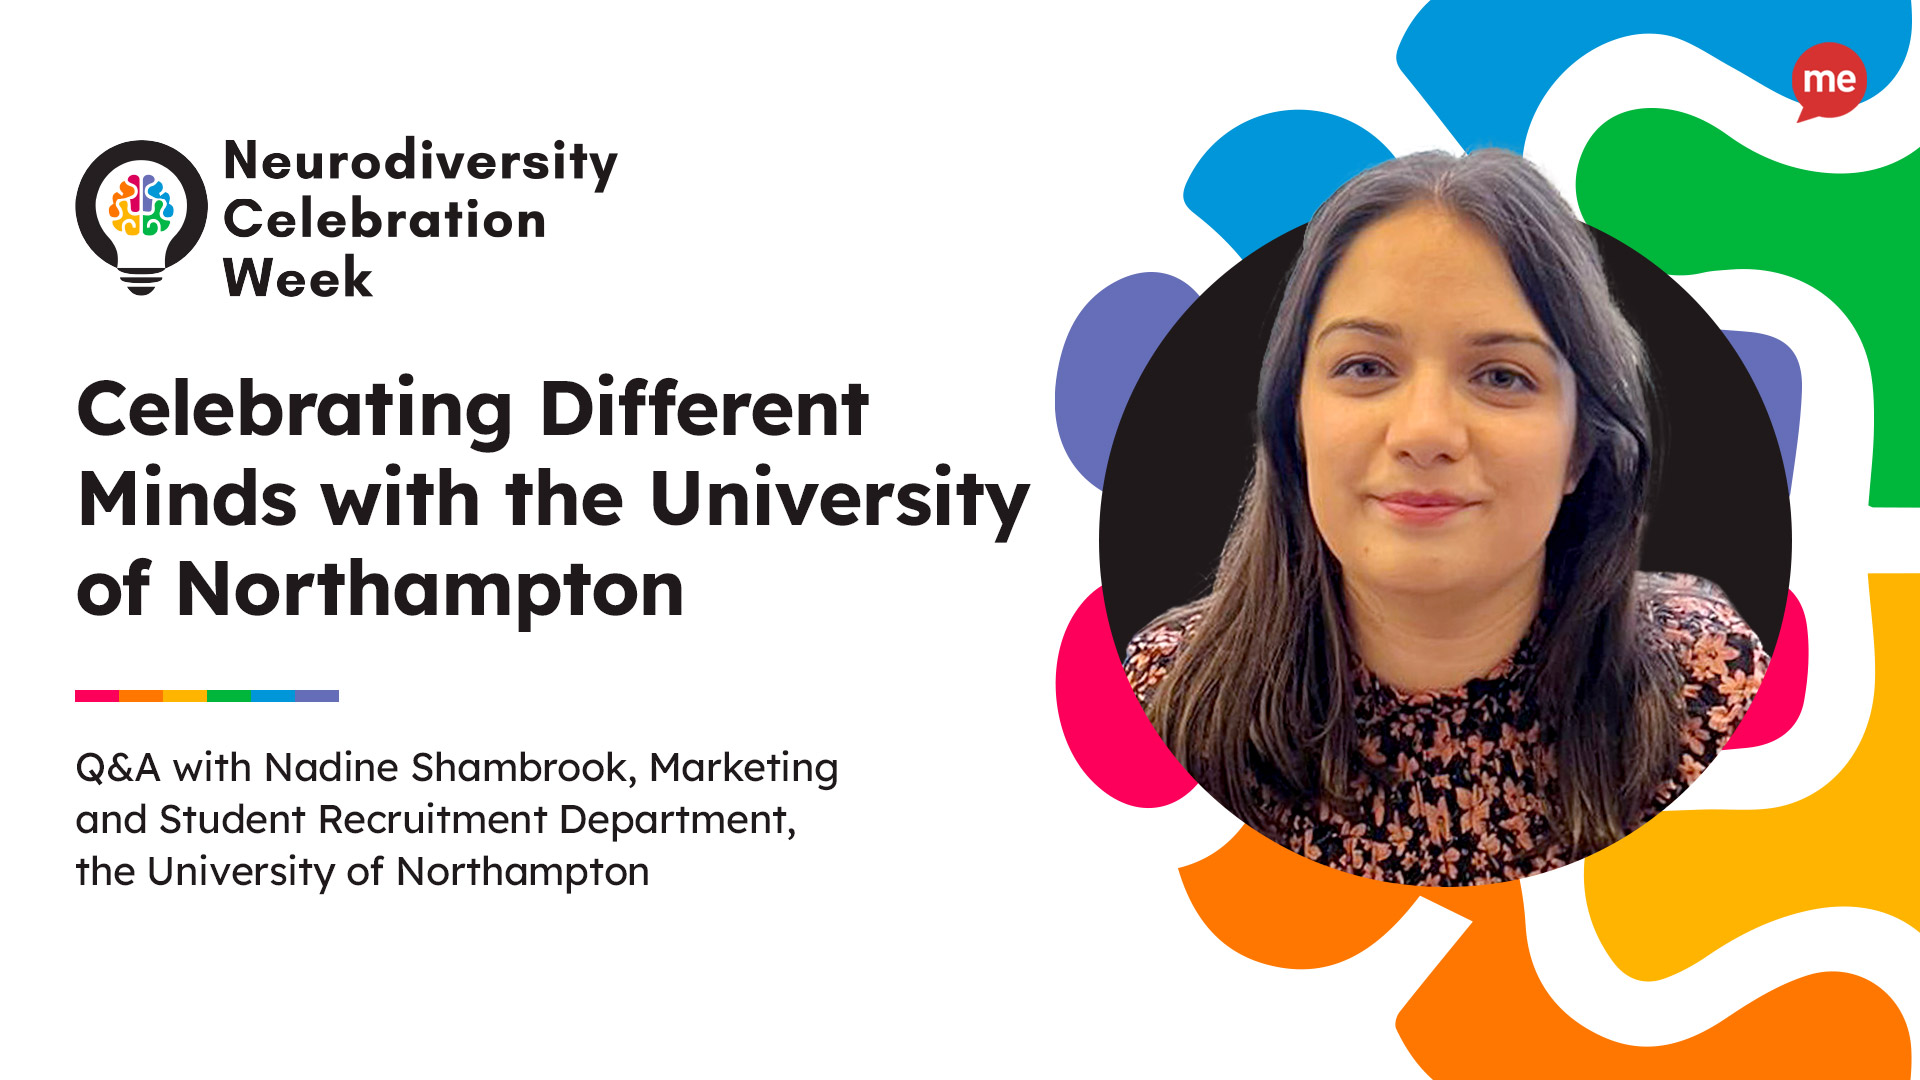 Celebrating Different Minds with the University of Northampton. Q&A with Nadine Shambrook, Marketing and Student Recruitment Department, the University of Northampton. Headshot of Nadine